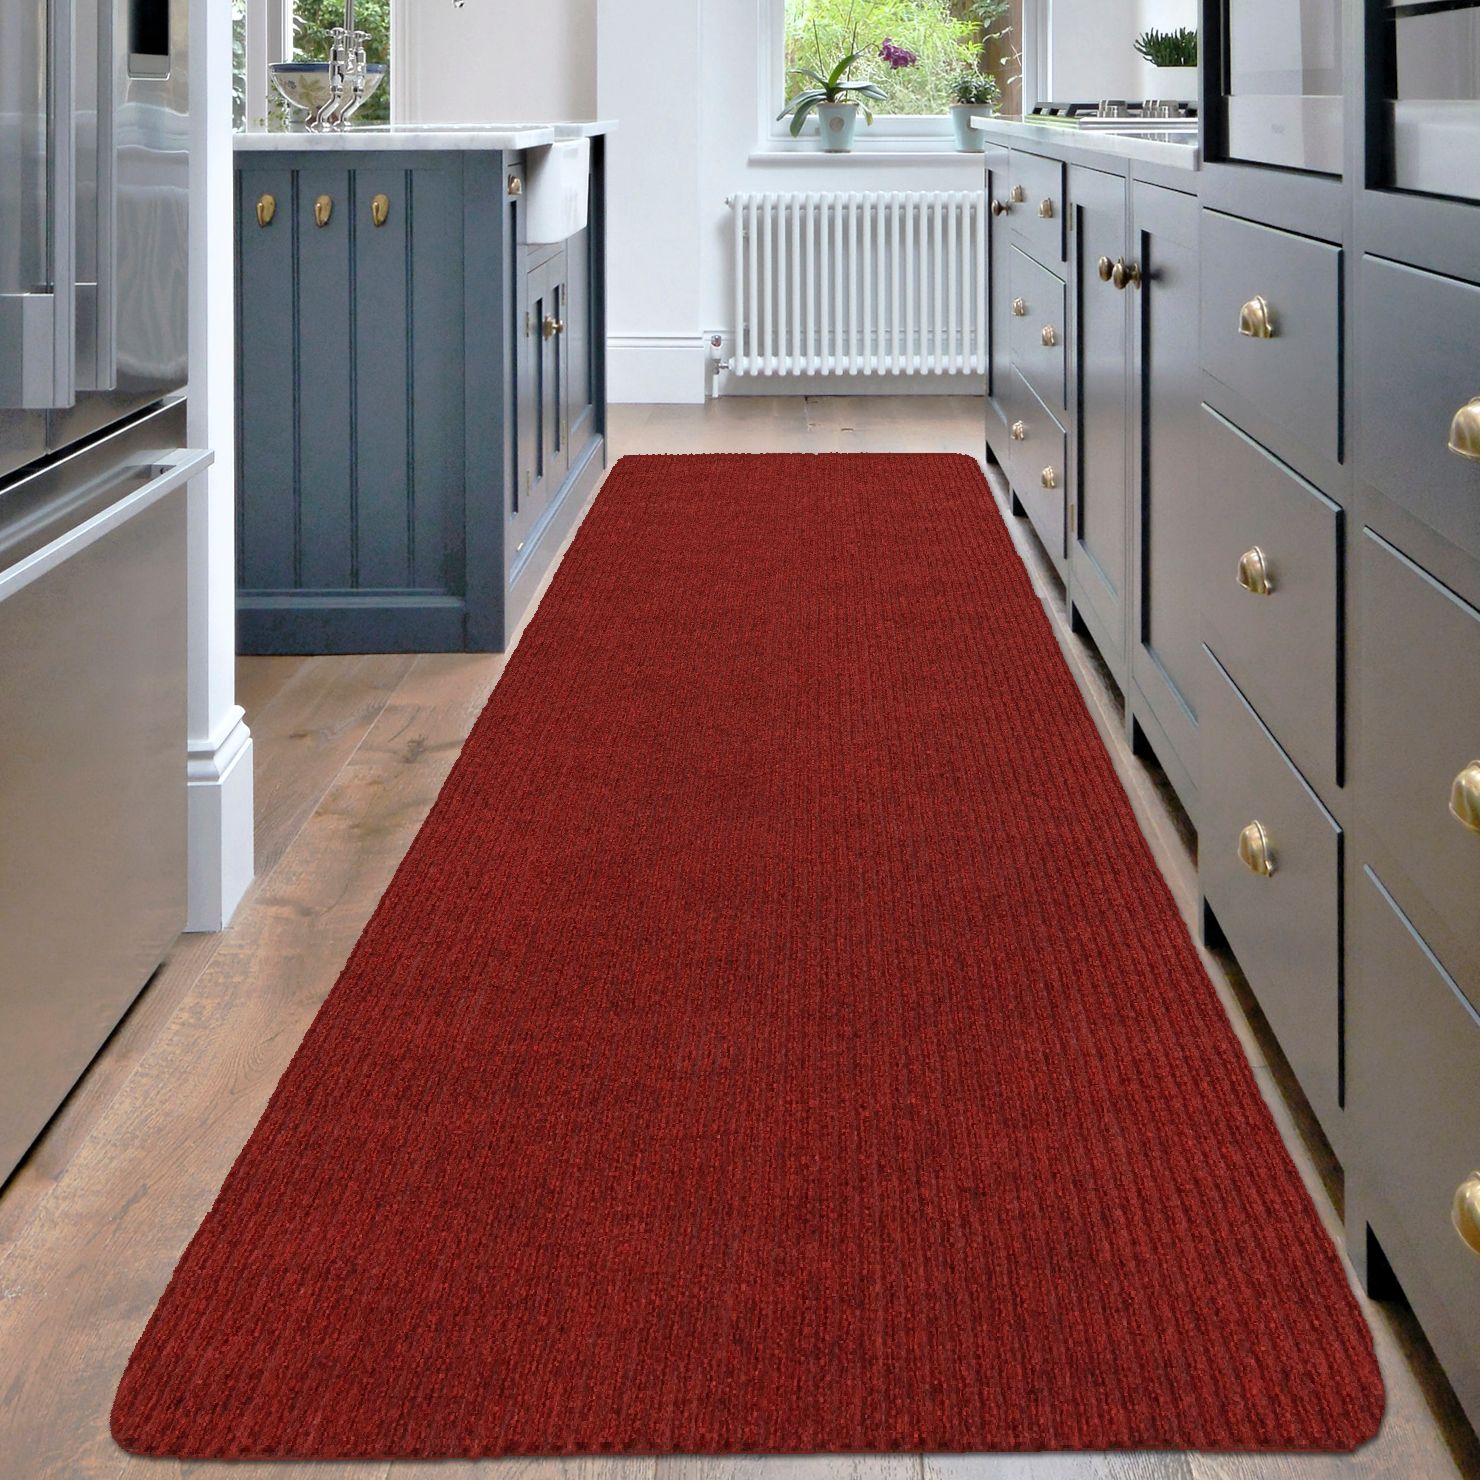 Ottomanson Lifesaver Collection Red 2 ft. 7 in x 9 ft. 10 in. Utility Ribbed Indoor/Outdoor Runner Rug